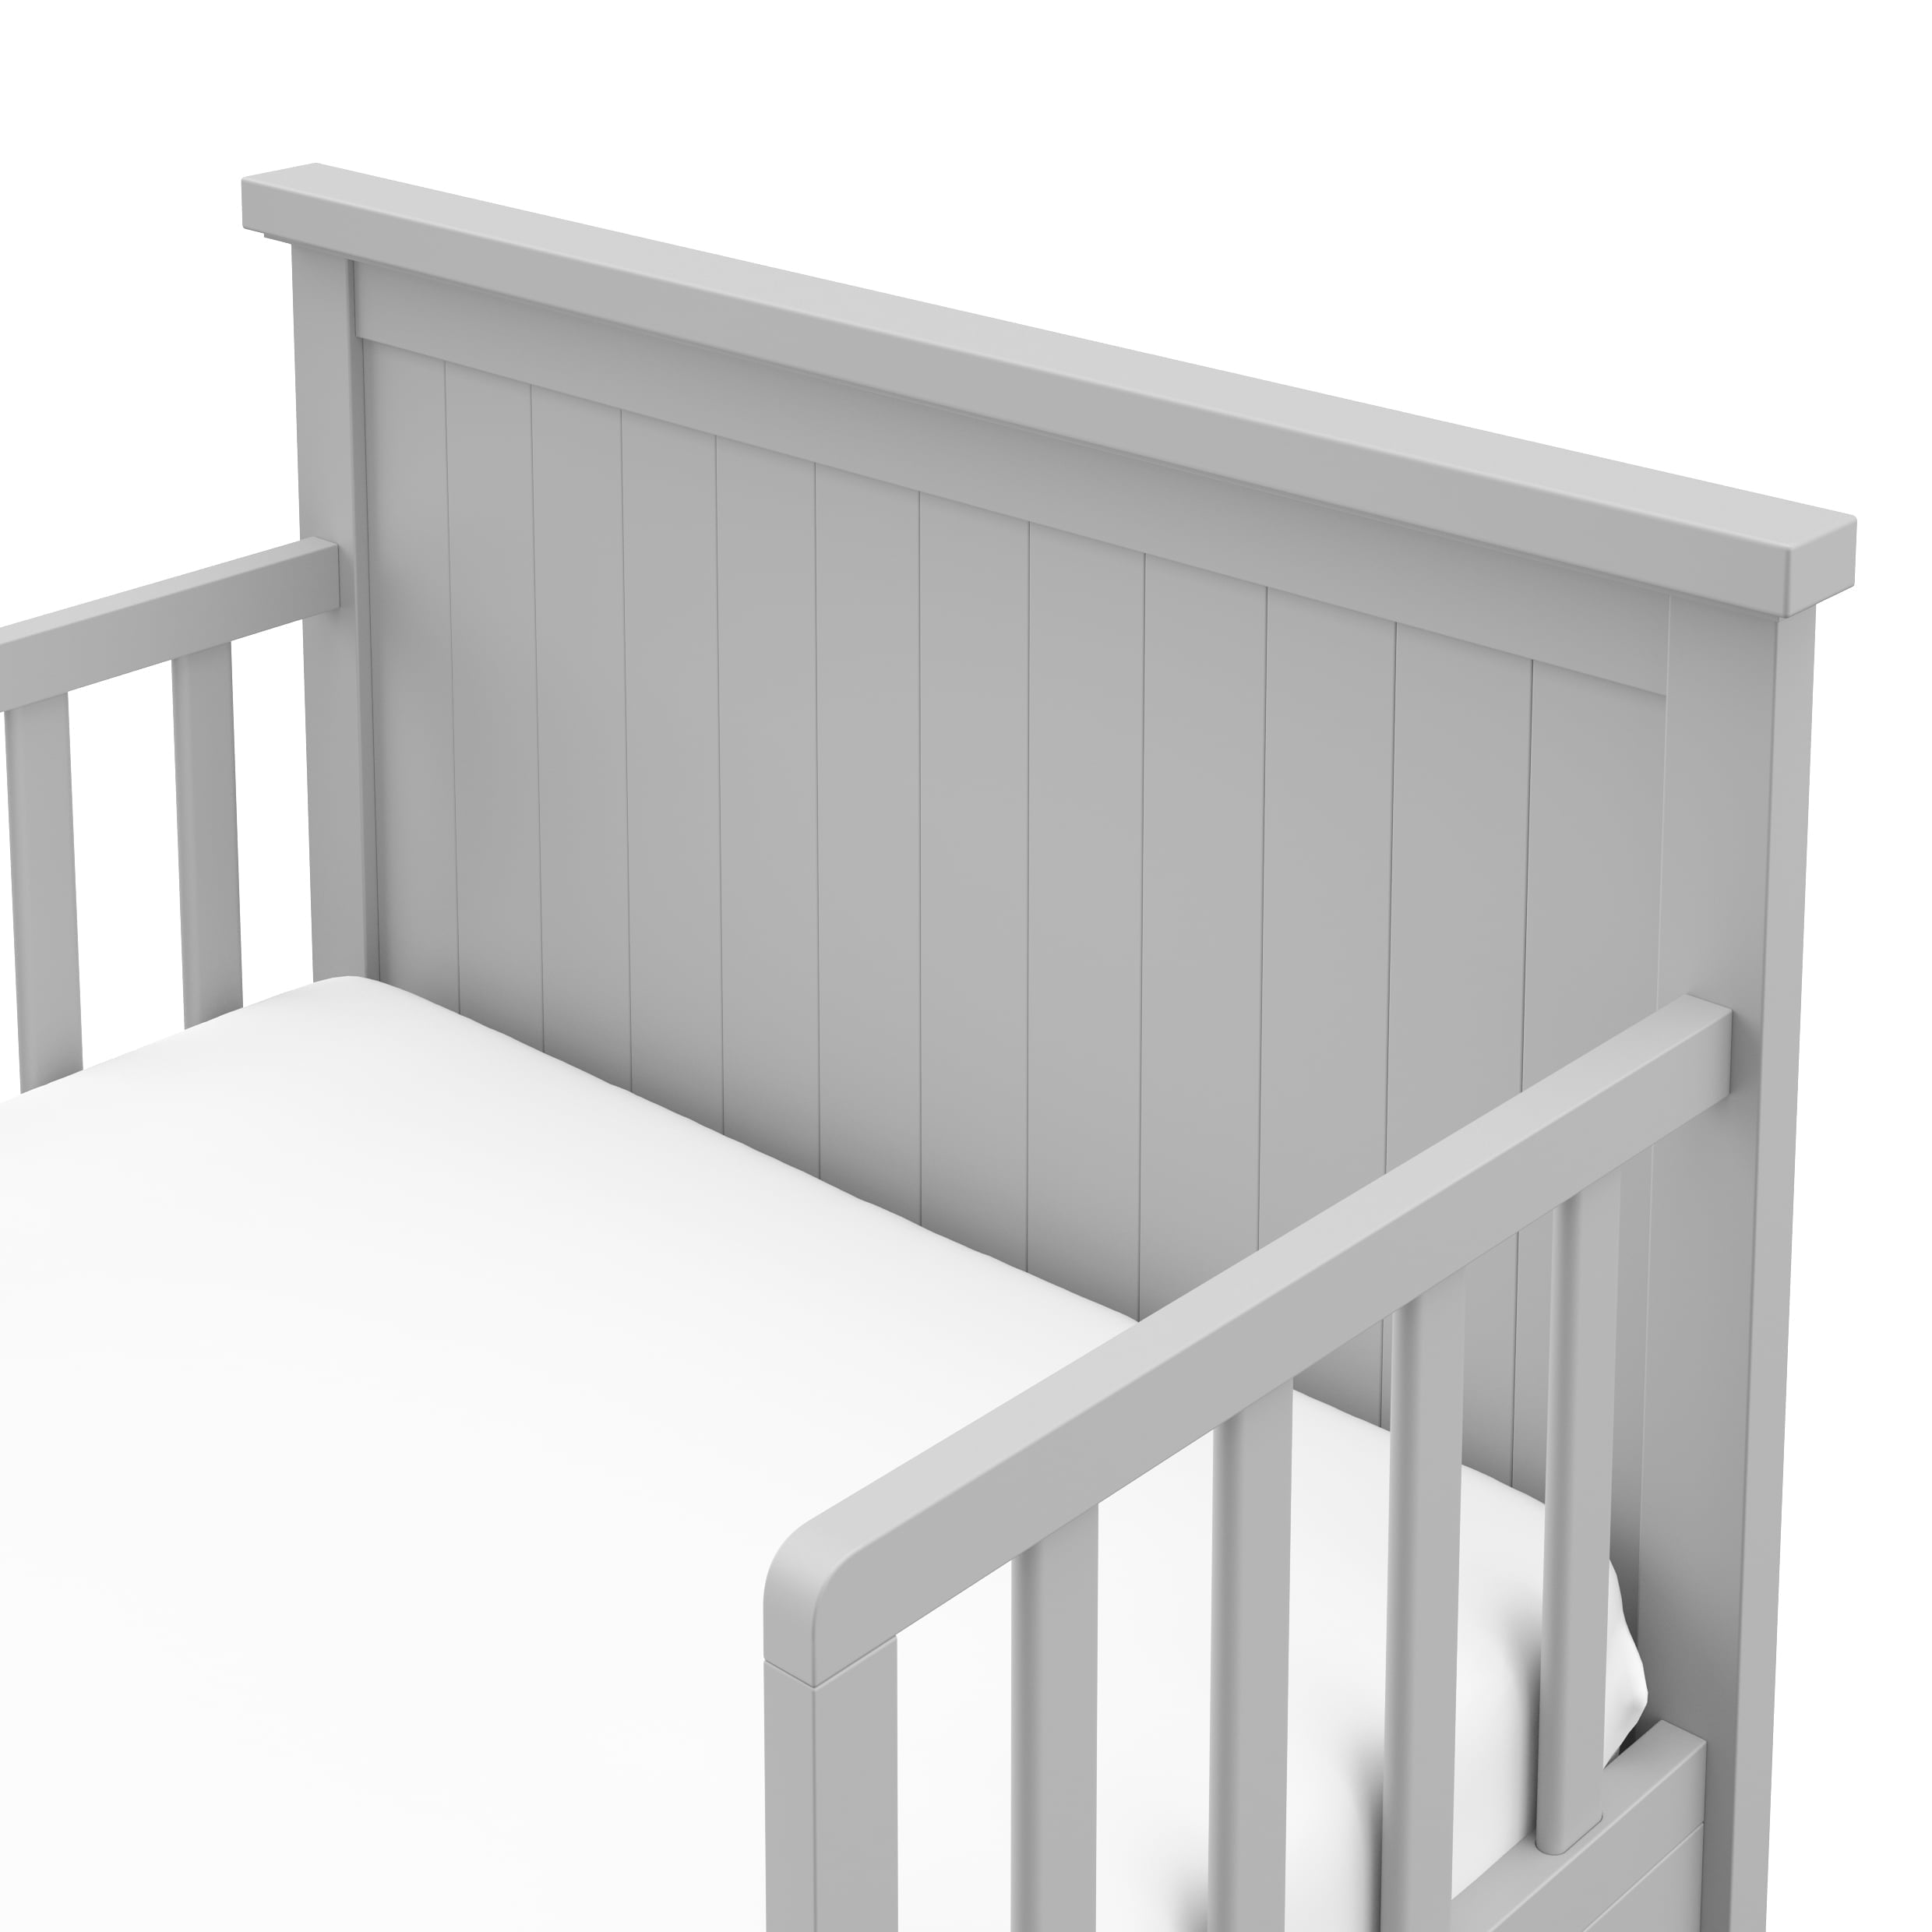 Graco Bailey Wood Single Toddler Kids Bed, Guardrails Included Pebble Gray